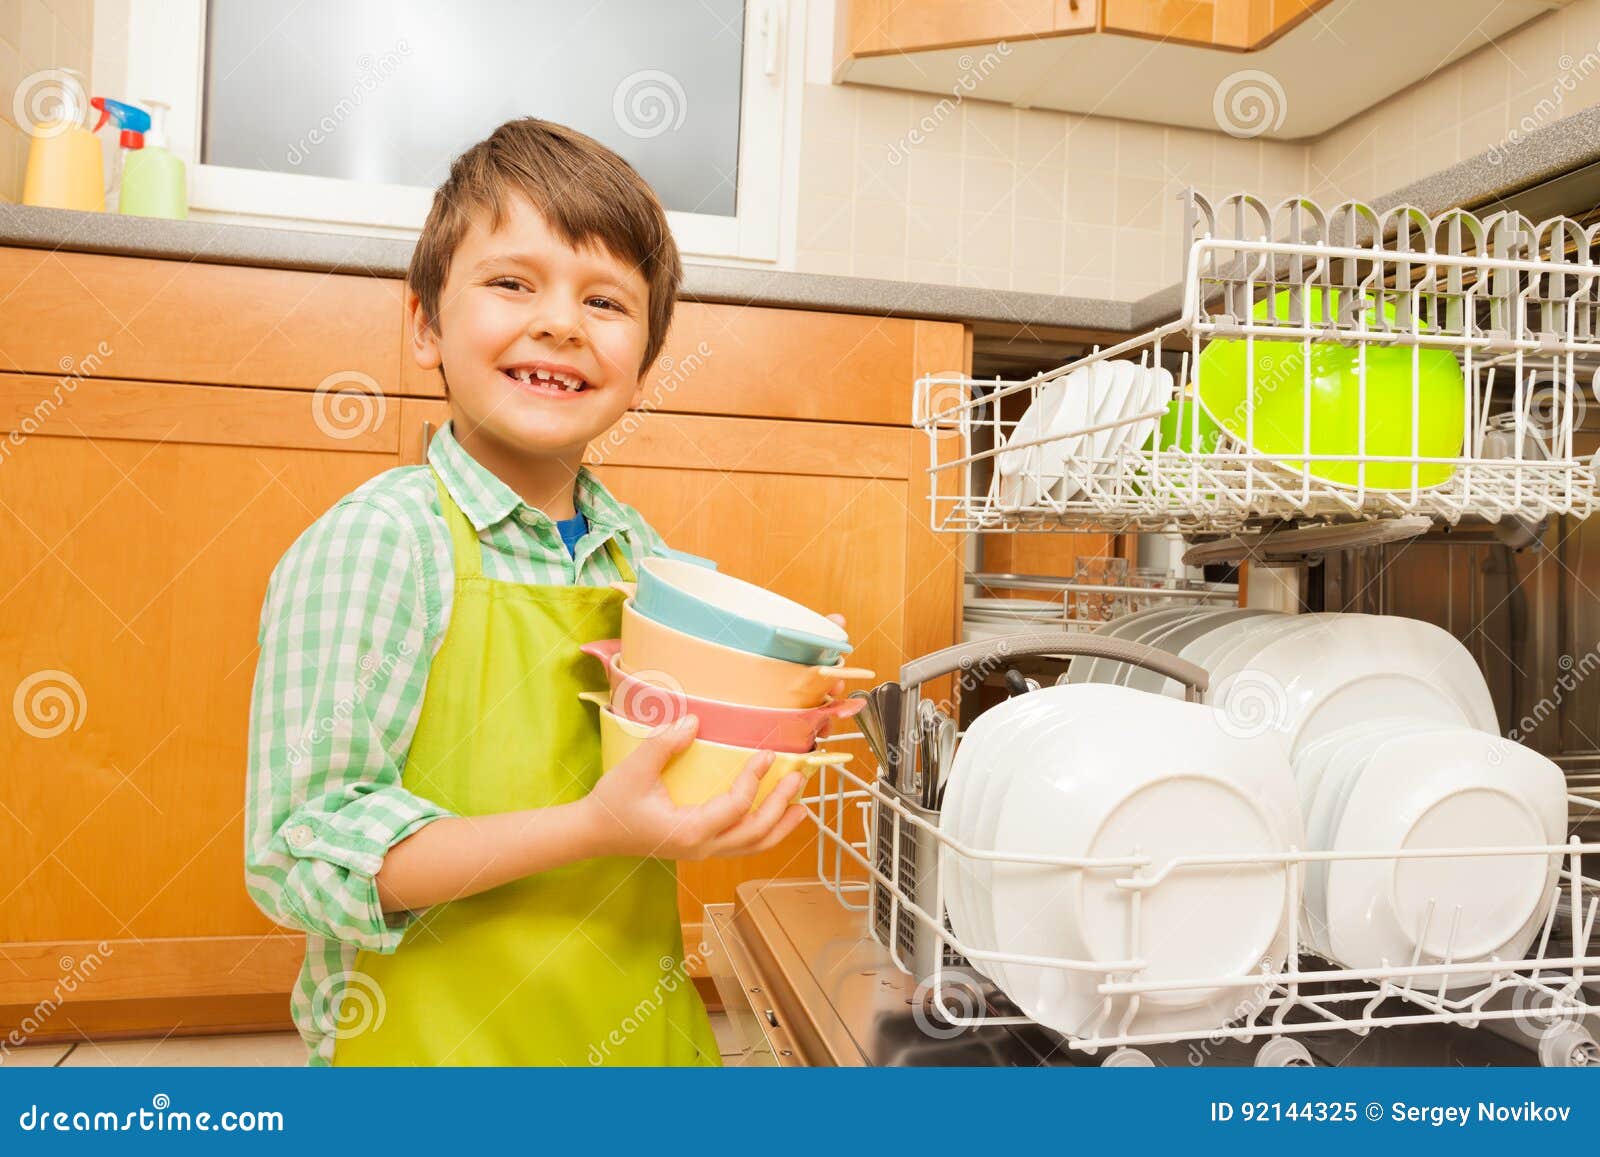 smiling boy pulling out bowls of the dishwasher